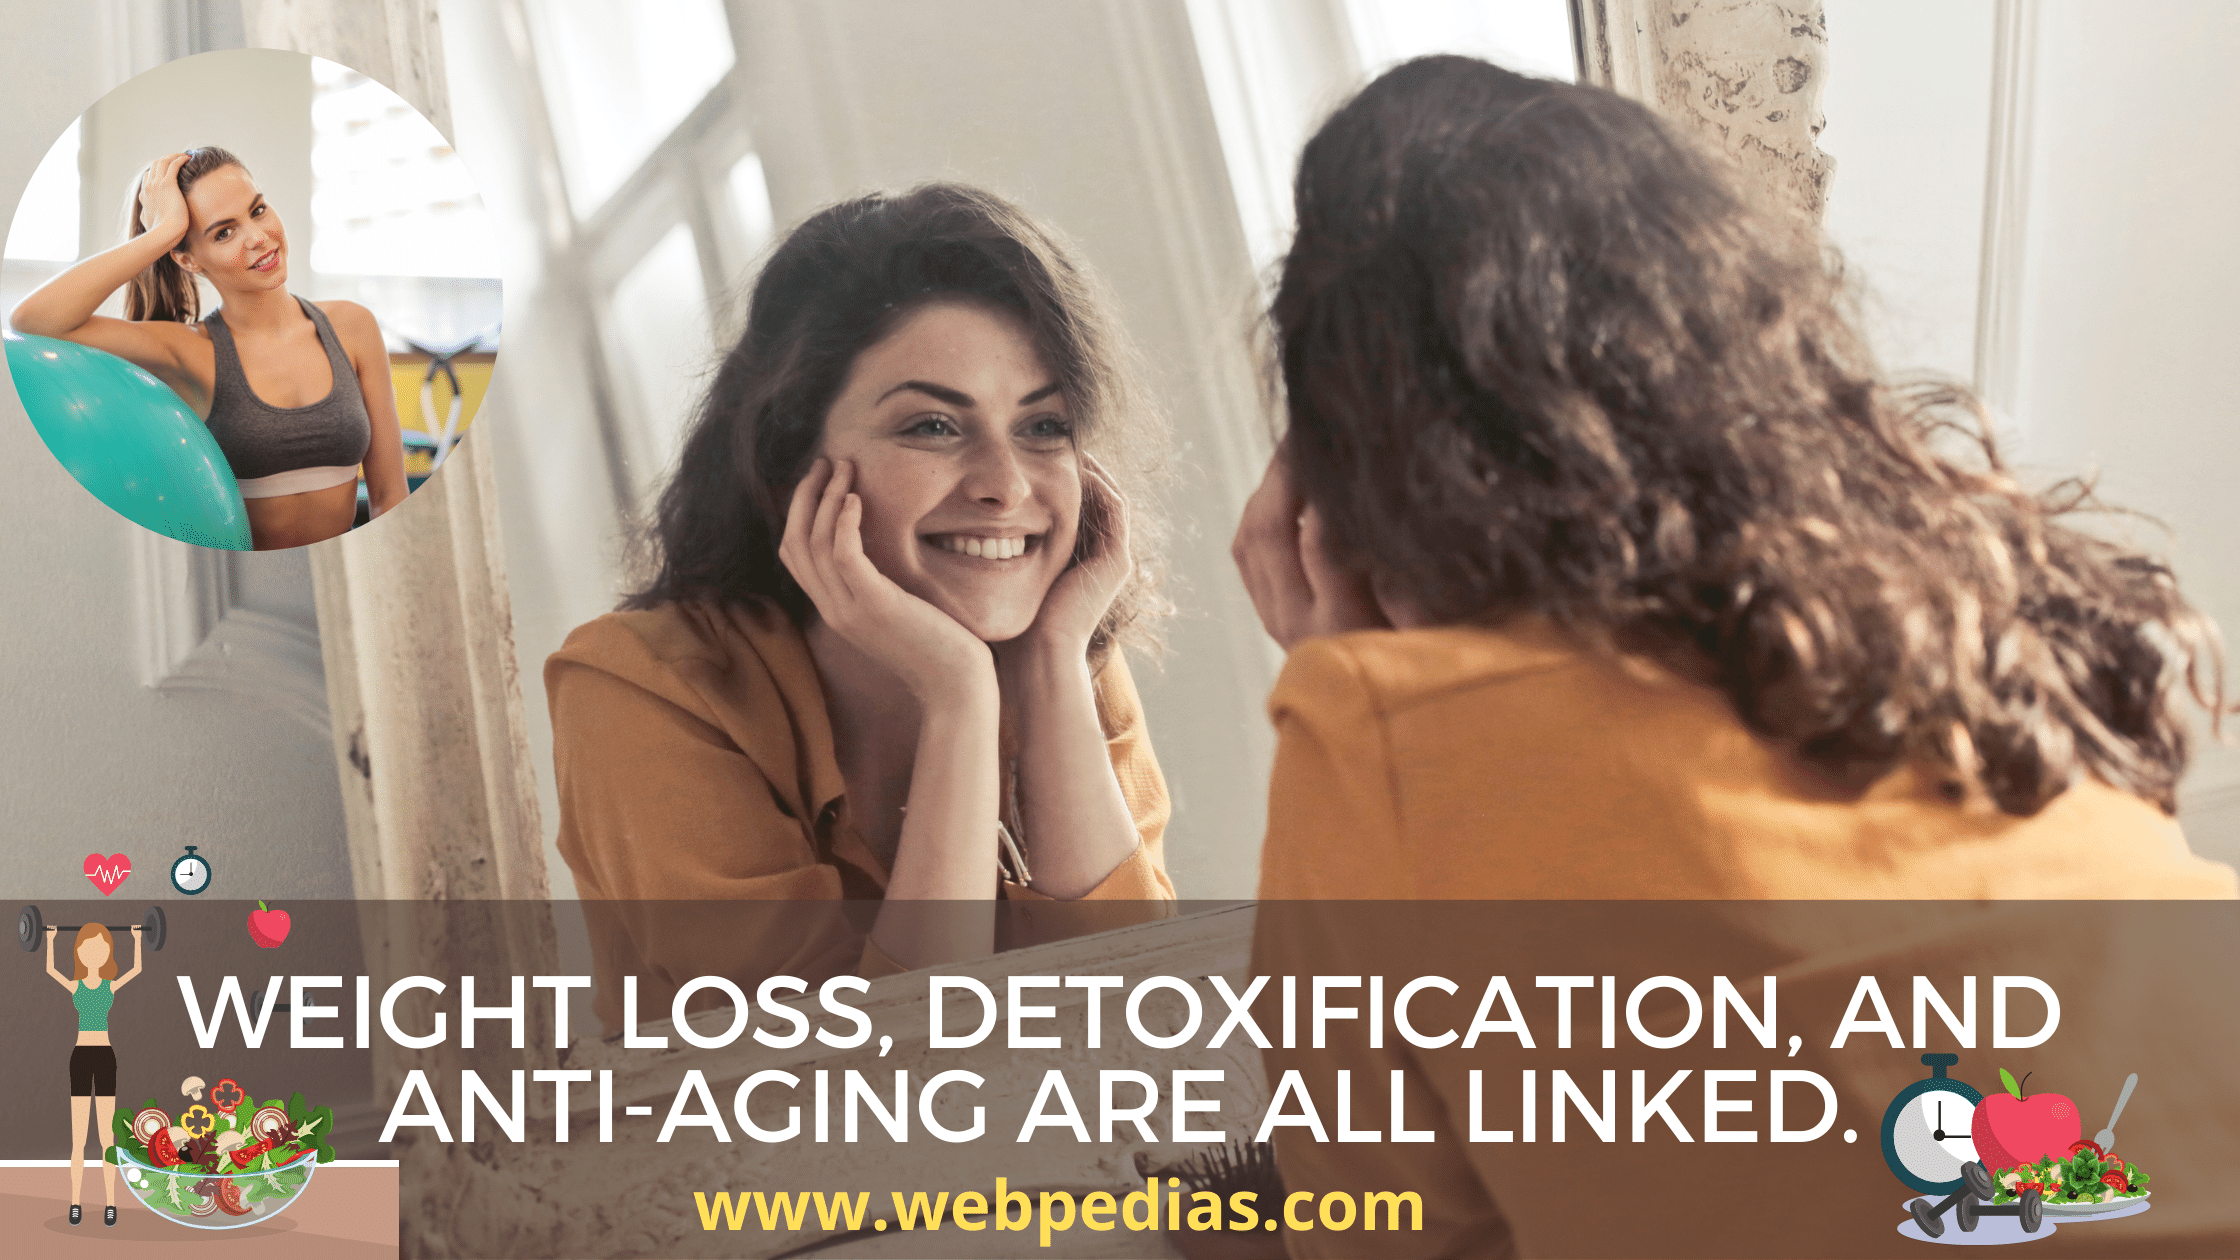 Weight loss, detoxification, and anti-aging are all linked.